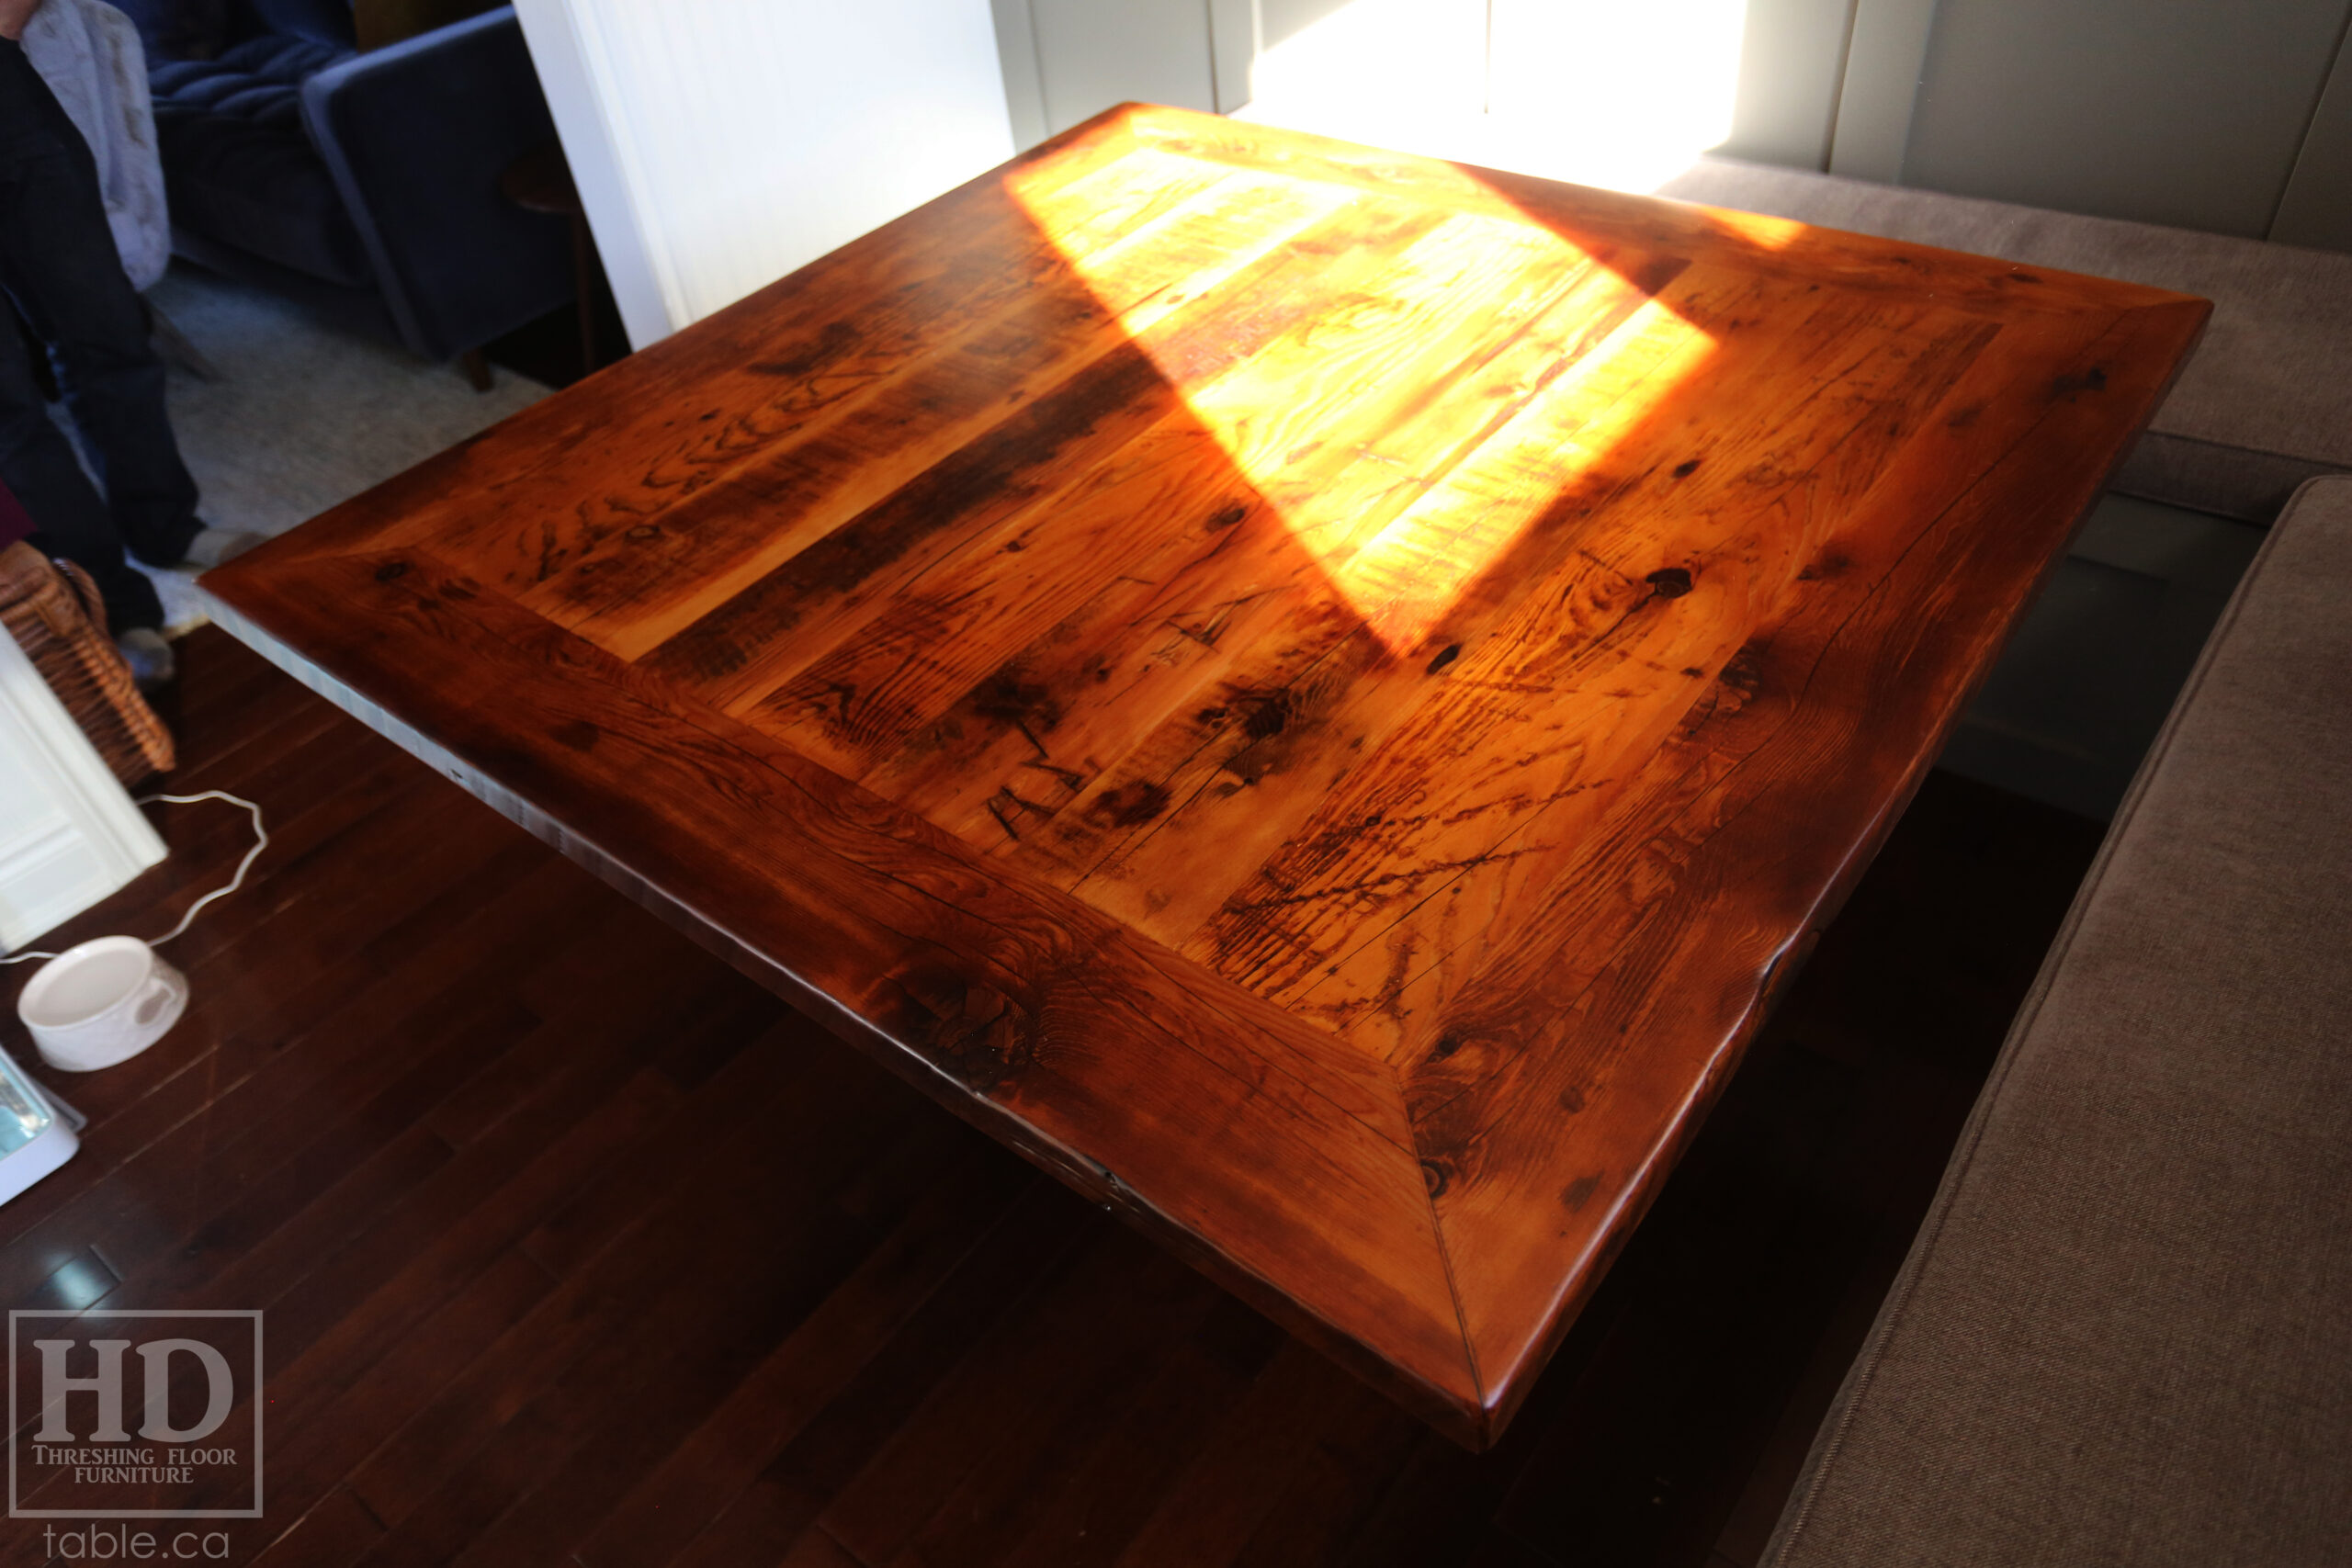 50" x 50" Ontario Barnwood Table we made for a Toronto Company - X Shaped Metal Base - Mitred Corners - Reclaimed Old Growth Hemlock Threshing Floor Construction - Original edges & distressing maintained - Premium epoxy + satin polyurethane finish  - One 18" Leaf Extension - www.table.ca